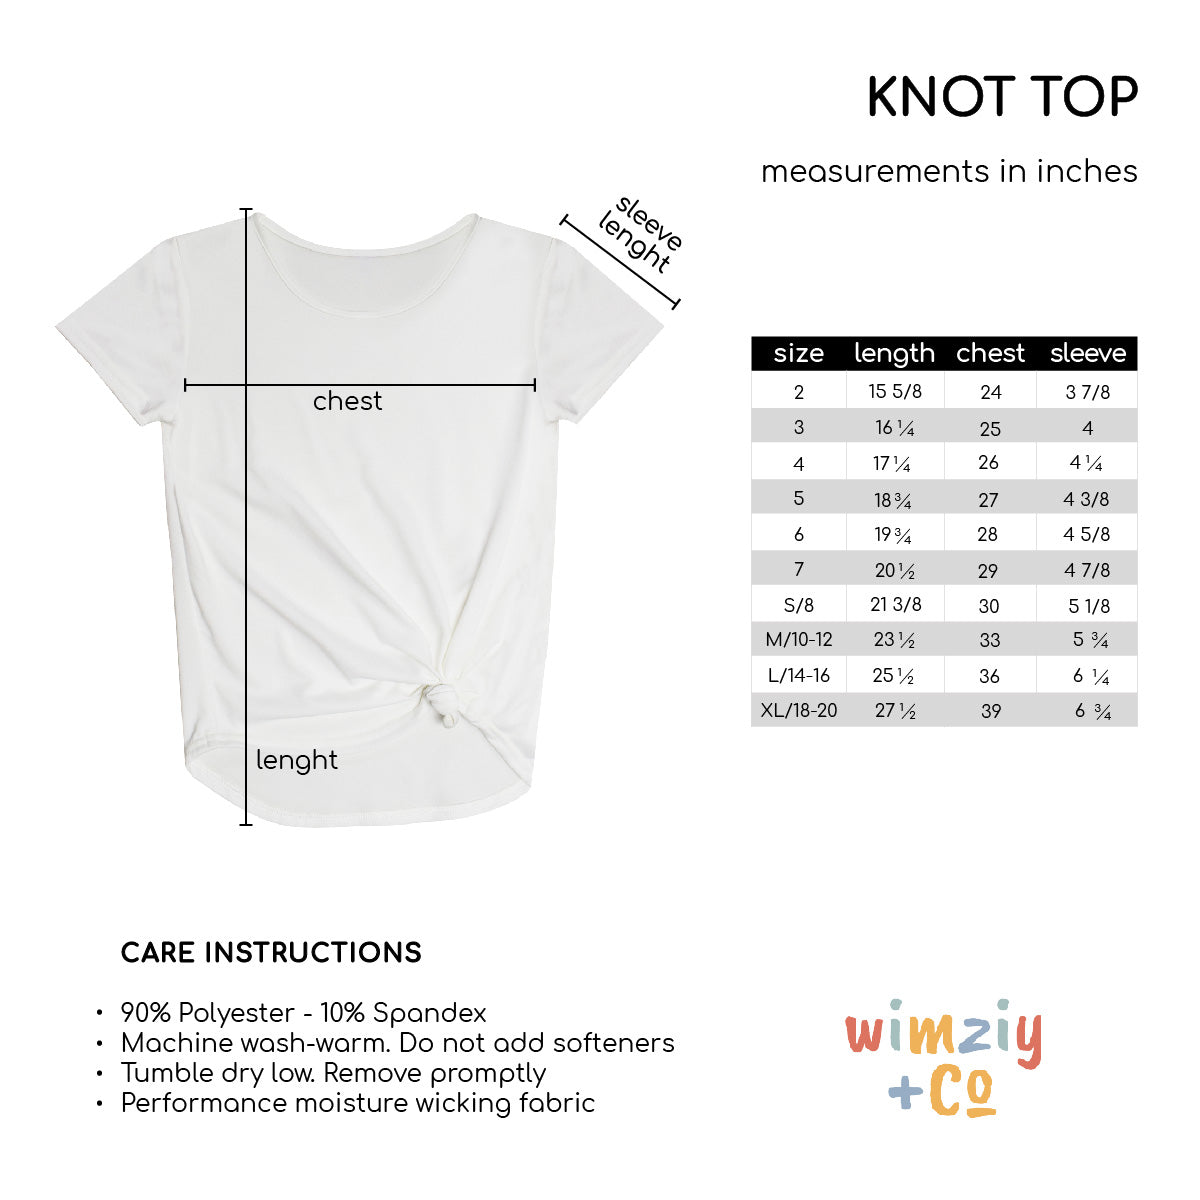 Soccer Love White Knot Top - Wimziy&Co.